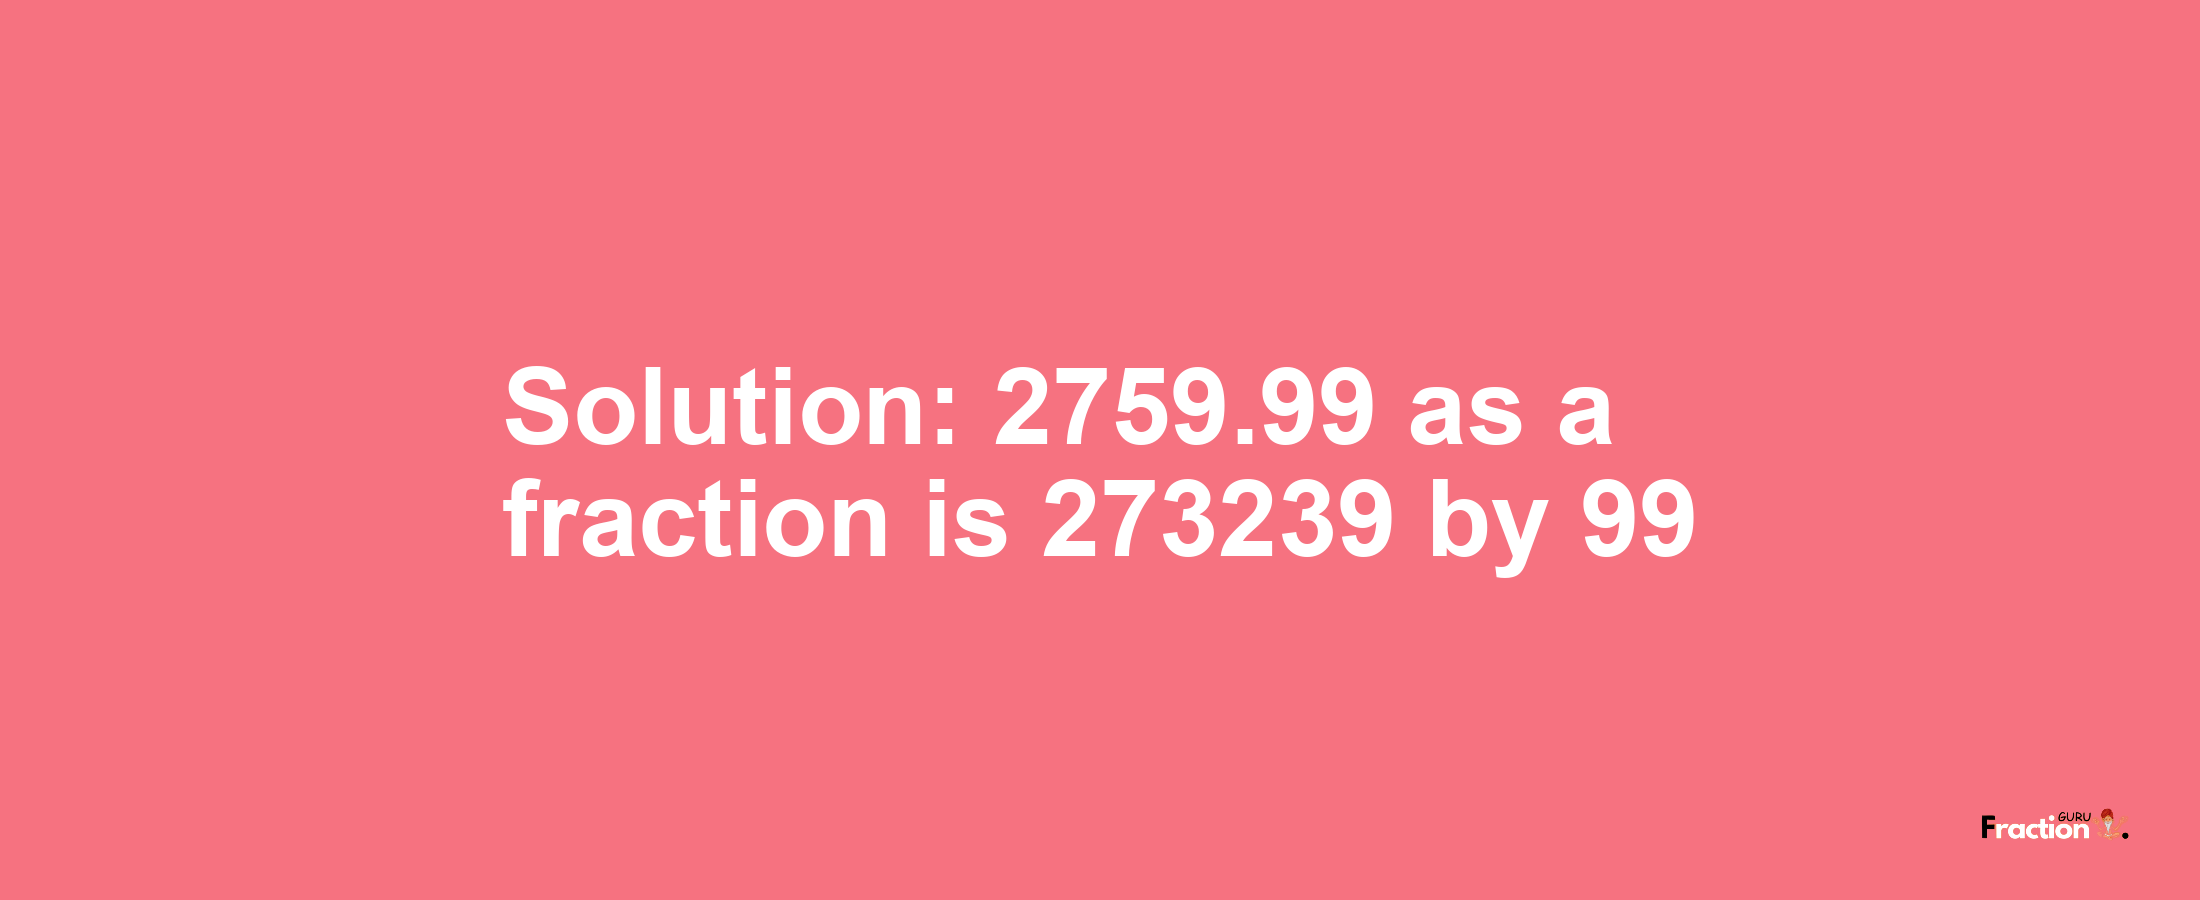 Solution:2759.99 as a fraction is 273239/99